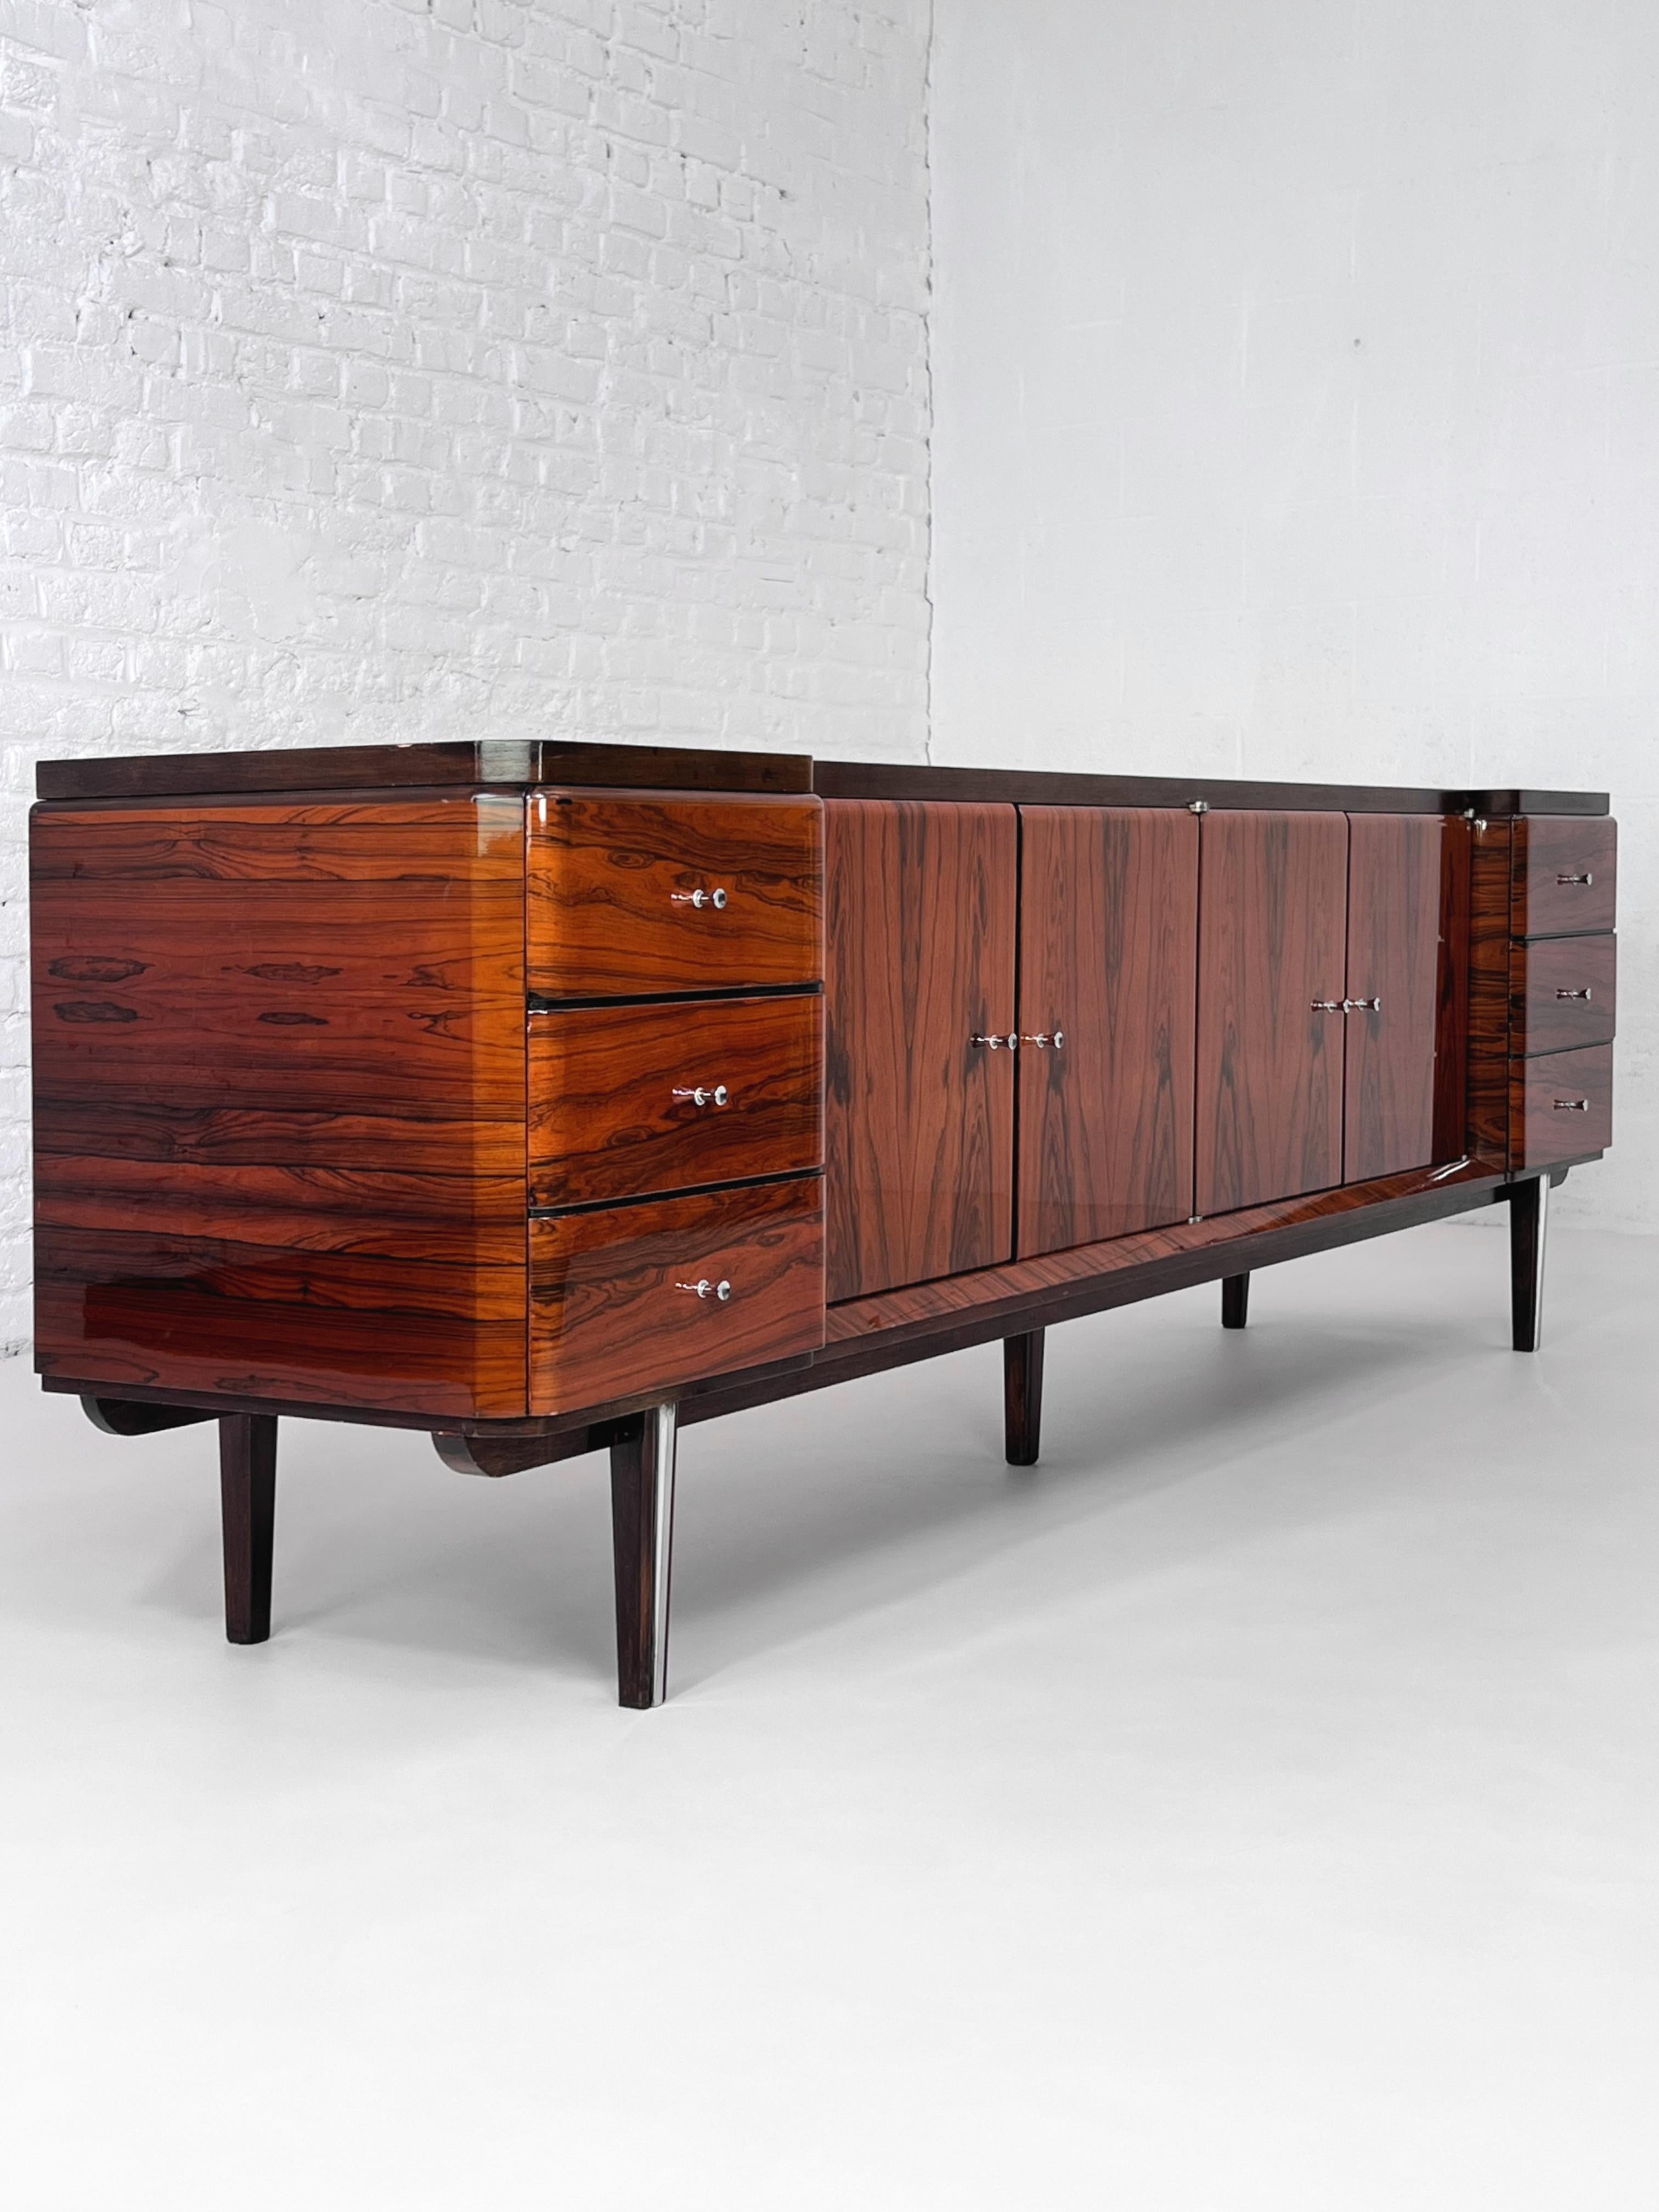 1950 -1960s Italian Design Rosewood Glossy Finishes Curved Sideboard  For Sale 8